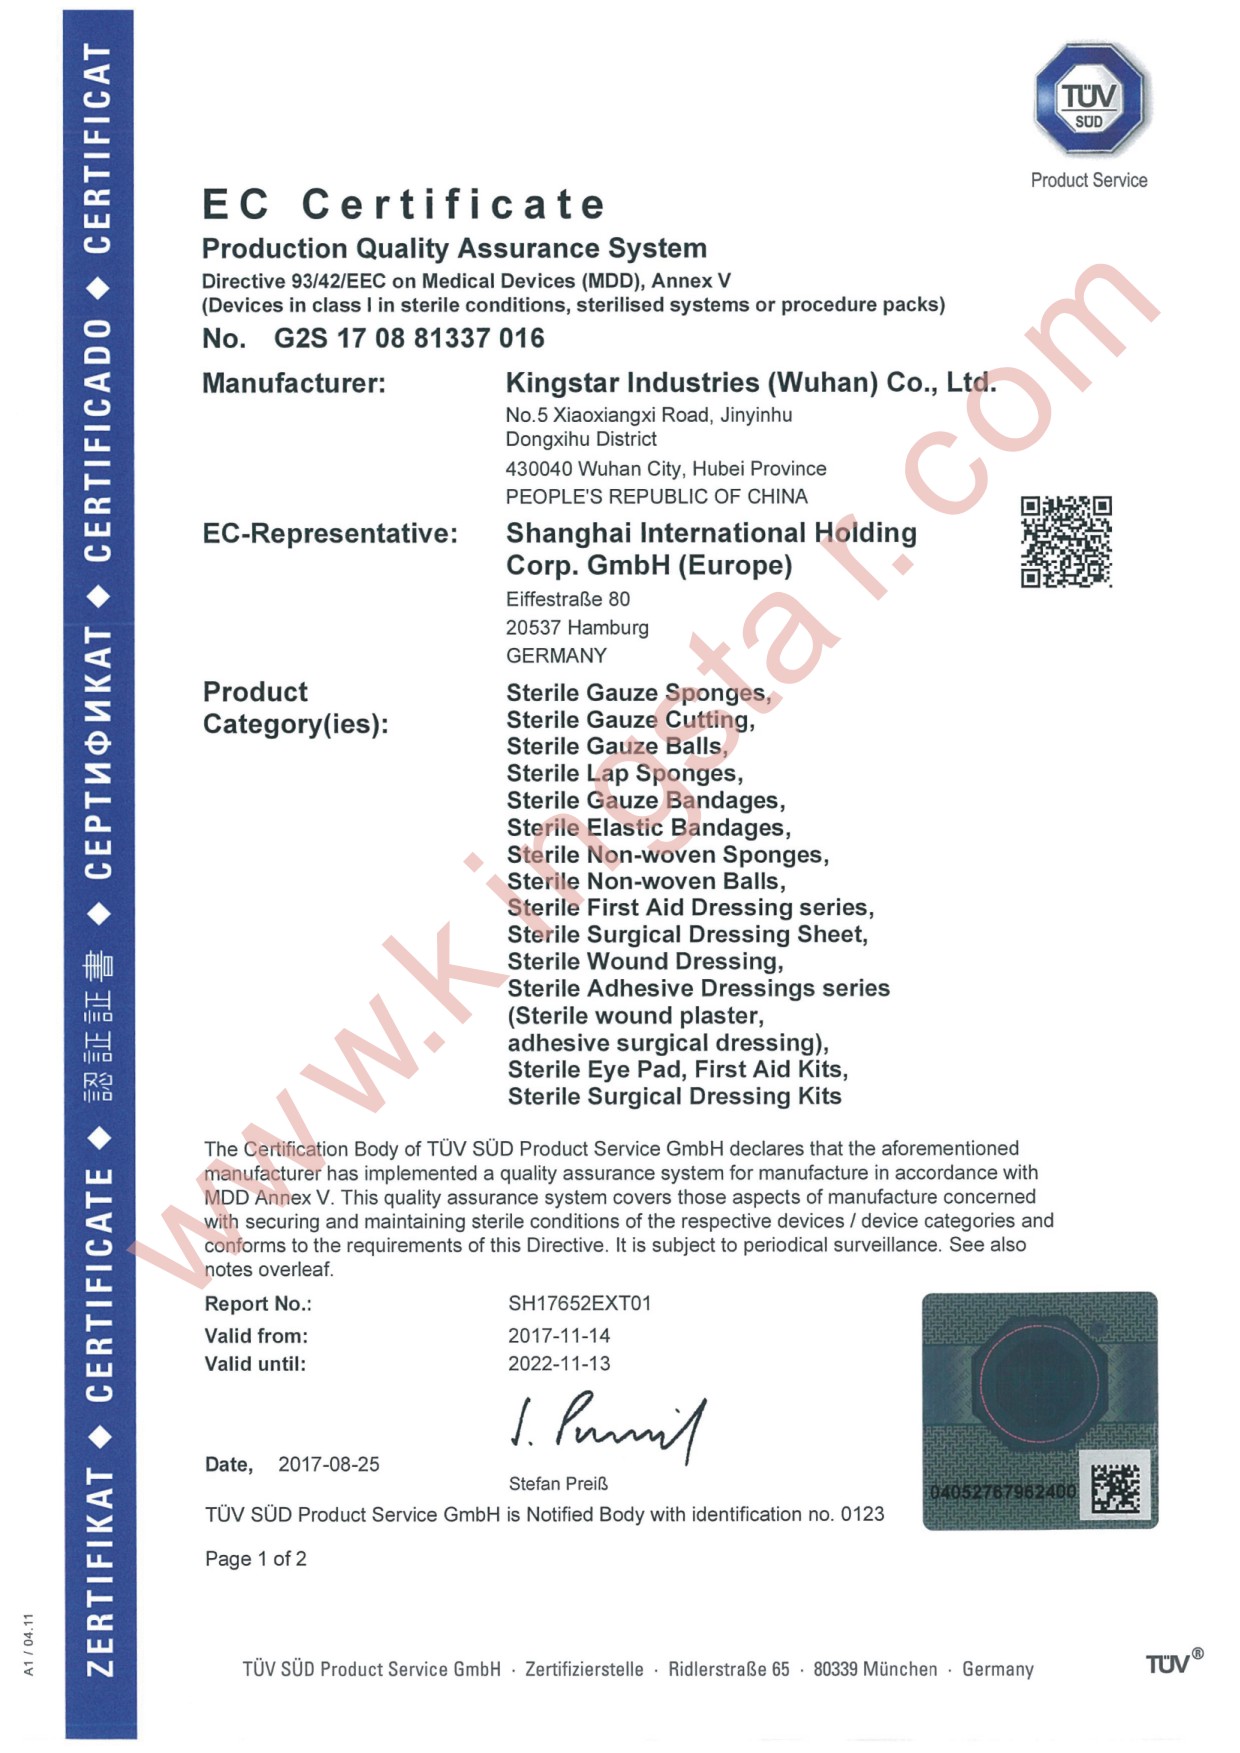 CE certificate sterile products - Kingstar Industries0000